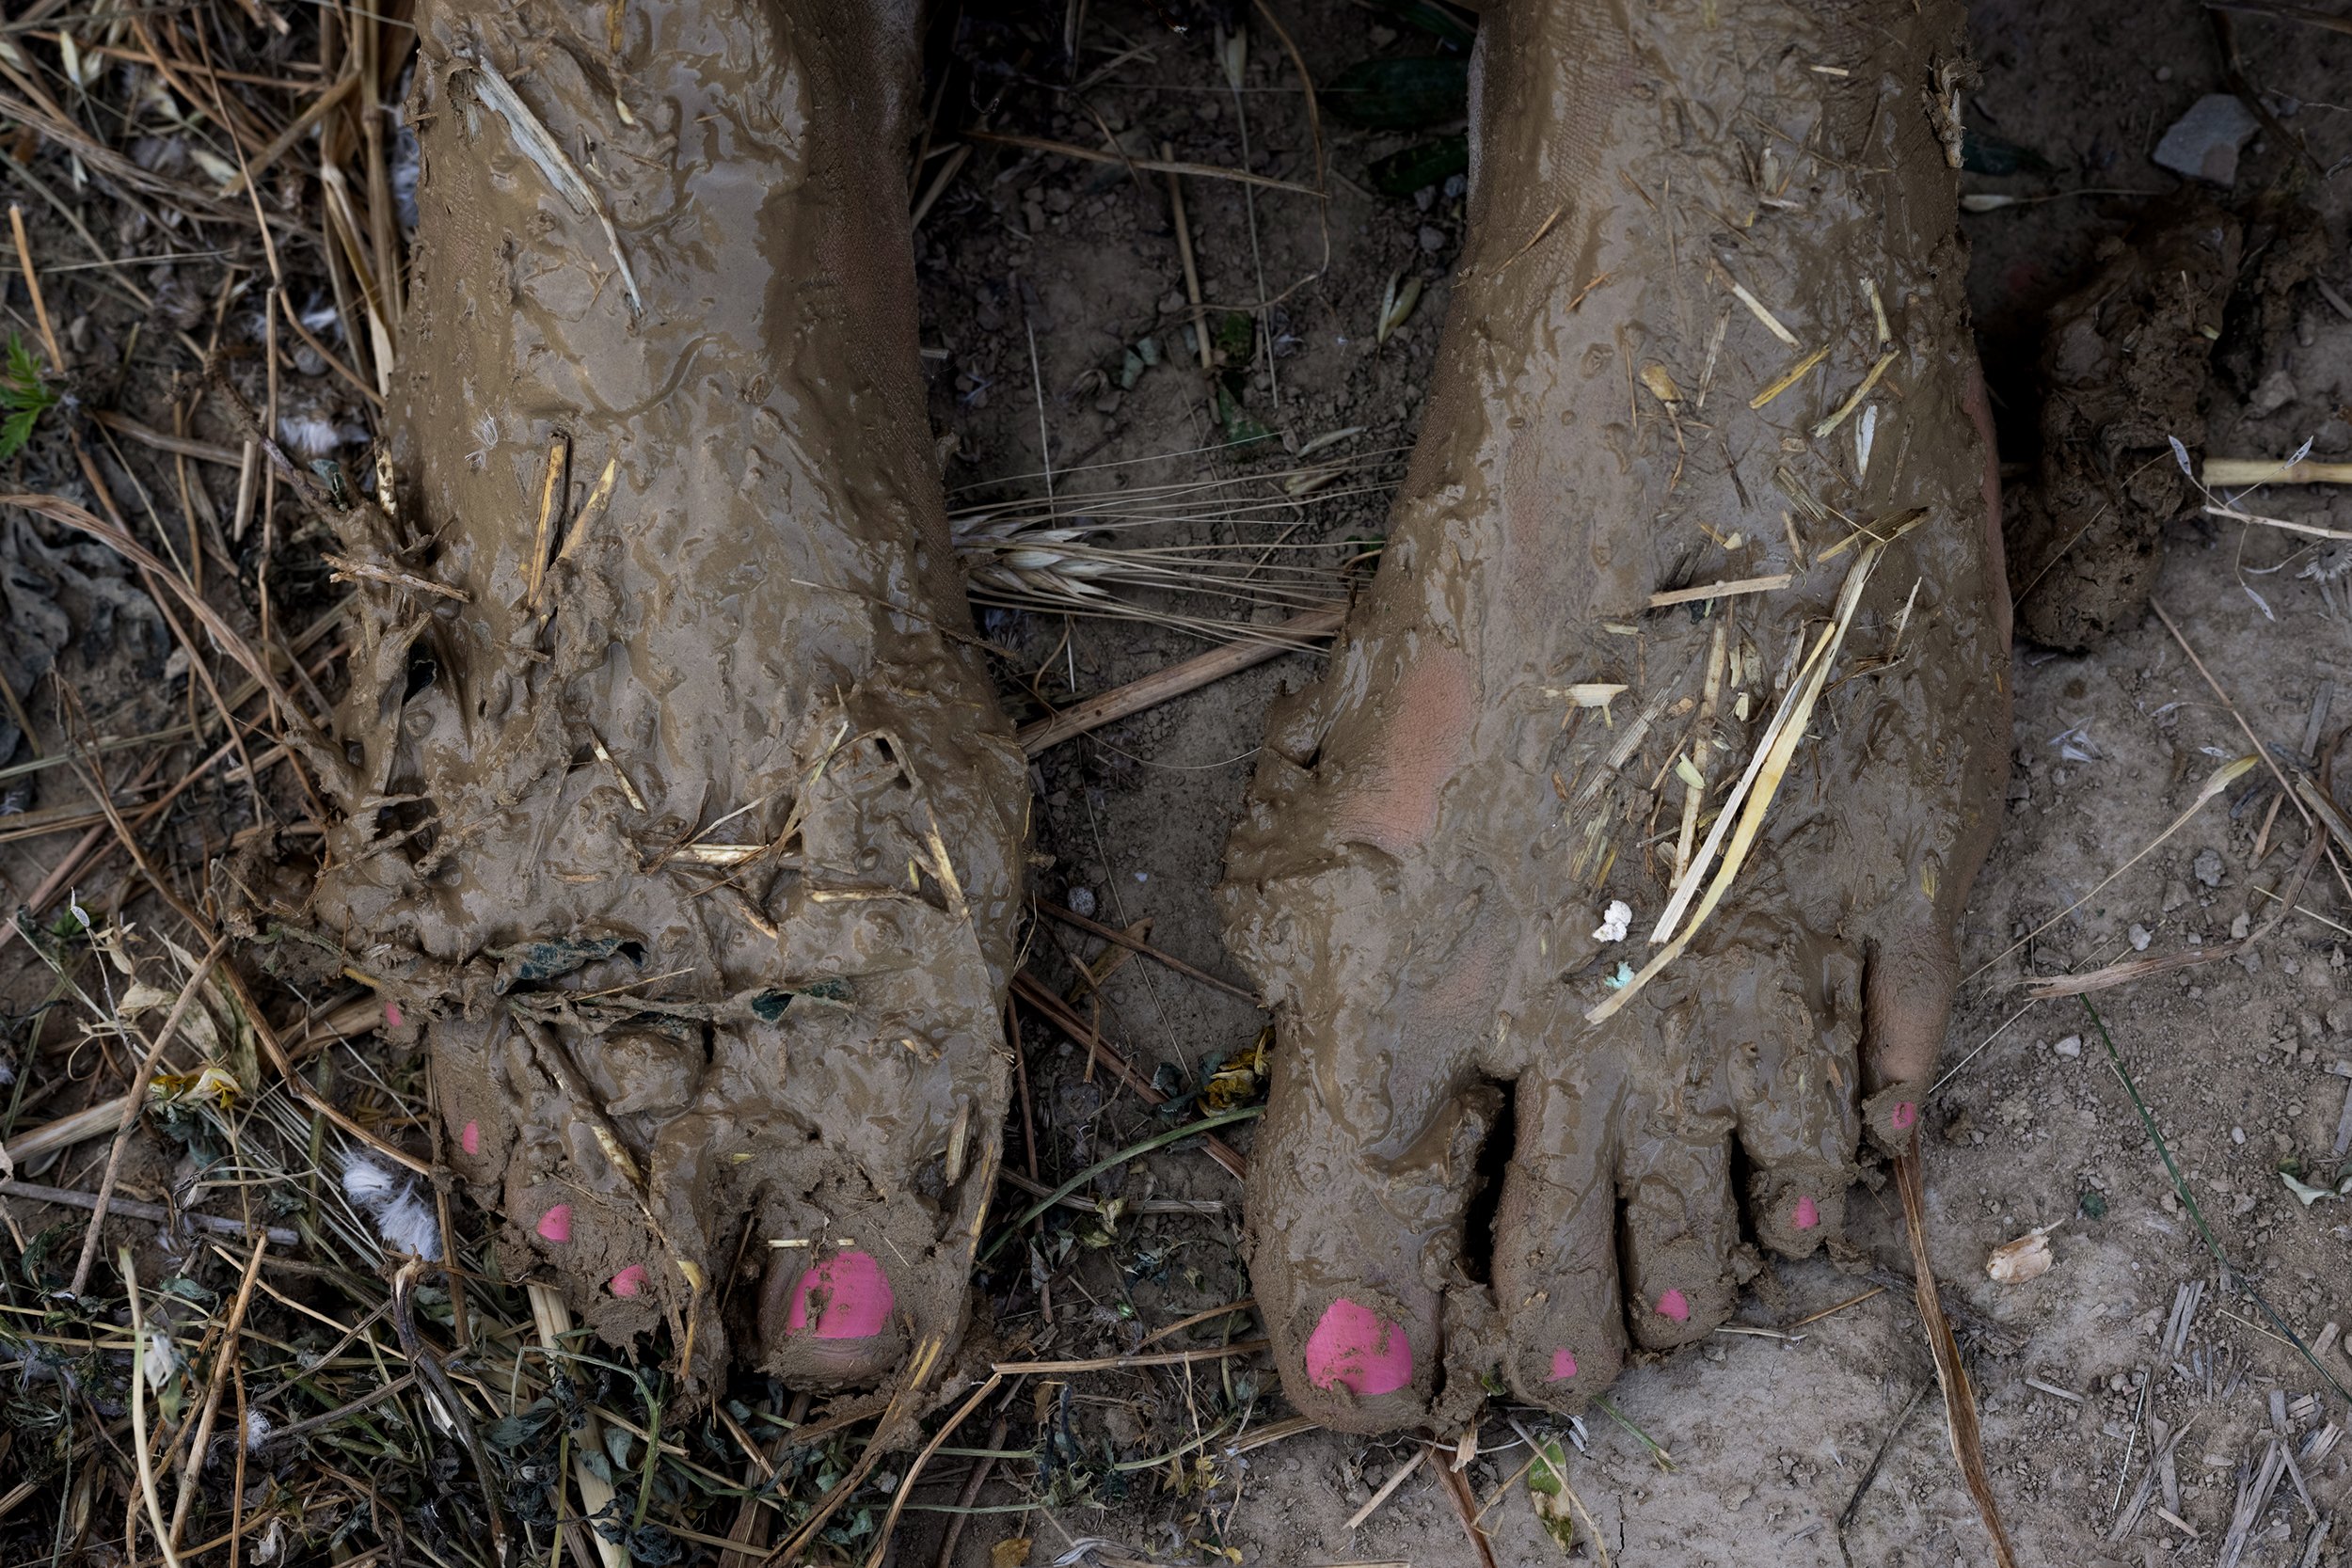  Painted toenails and muddy clay from adobe trampling on a brickmaker’s feet in Nyim on July 3, 2022. The clay, mixed with water, earth, and straw, was first kneaded together by trampling barefoot, then the mixed material was slammed into a wooden fr